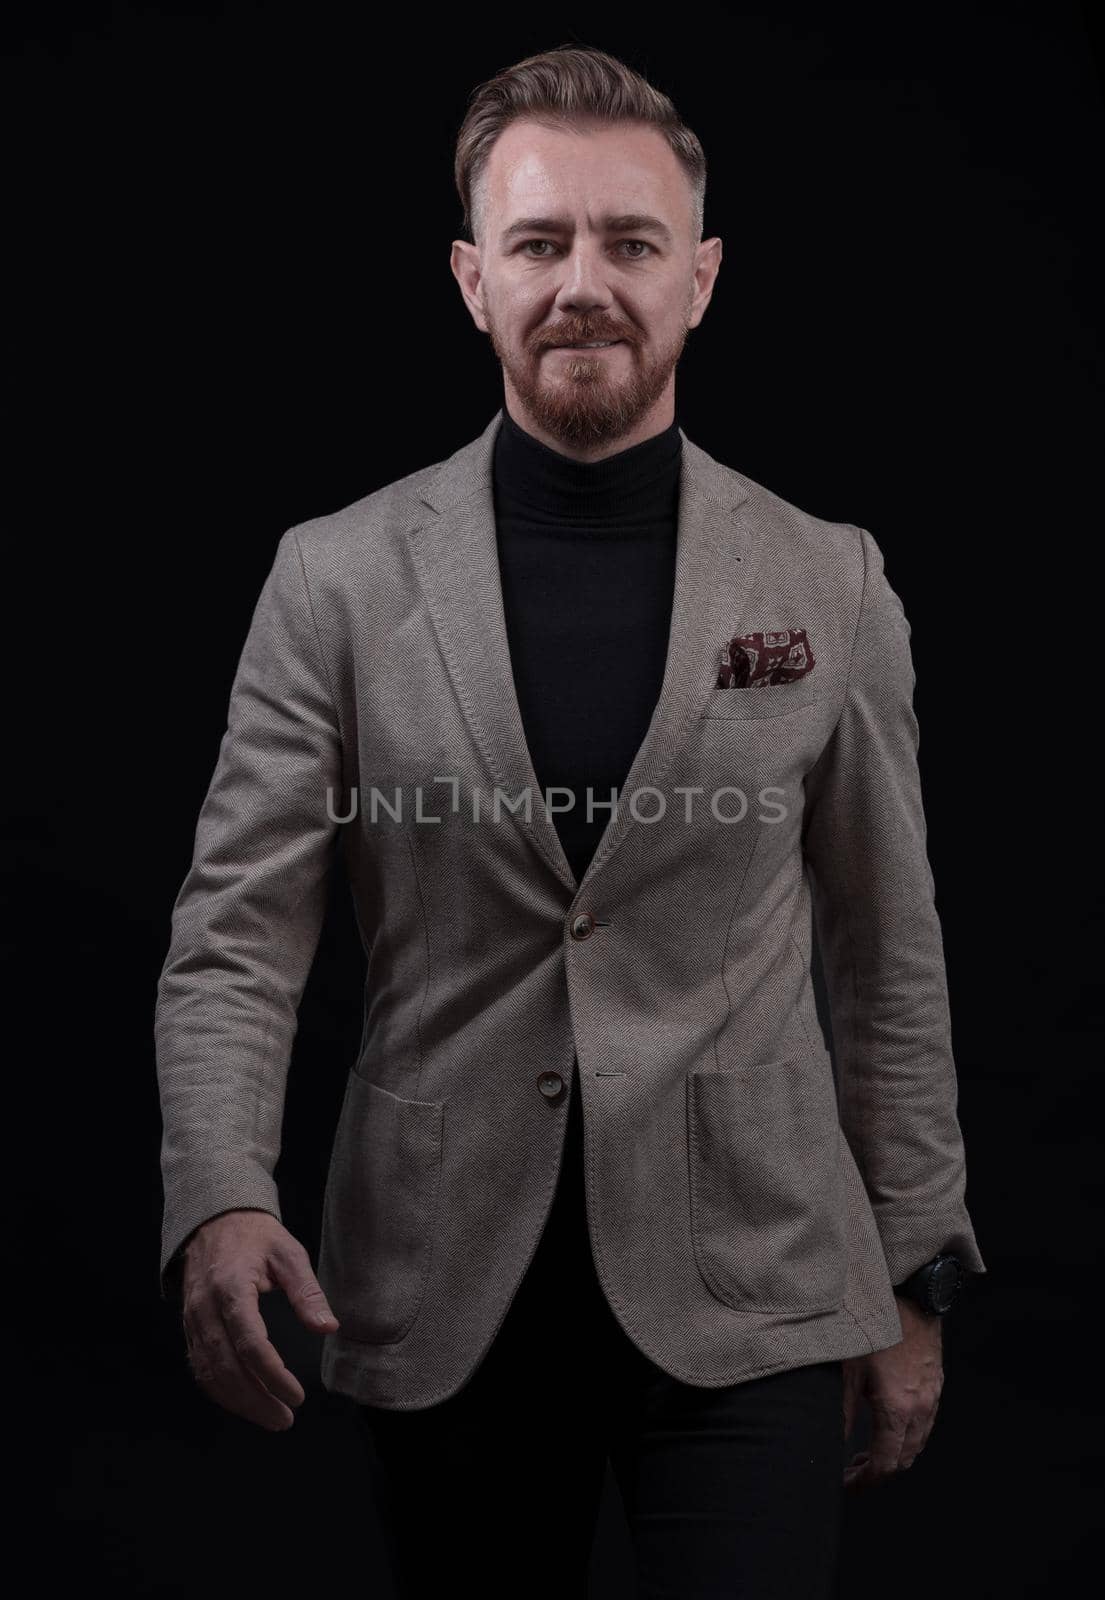 Confident businessman walking forward wearing a causal suit, handsome senior business man hero shot portrait isolated on black. High quality photo